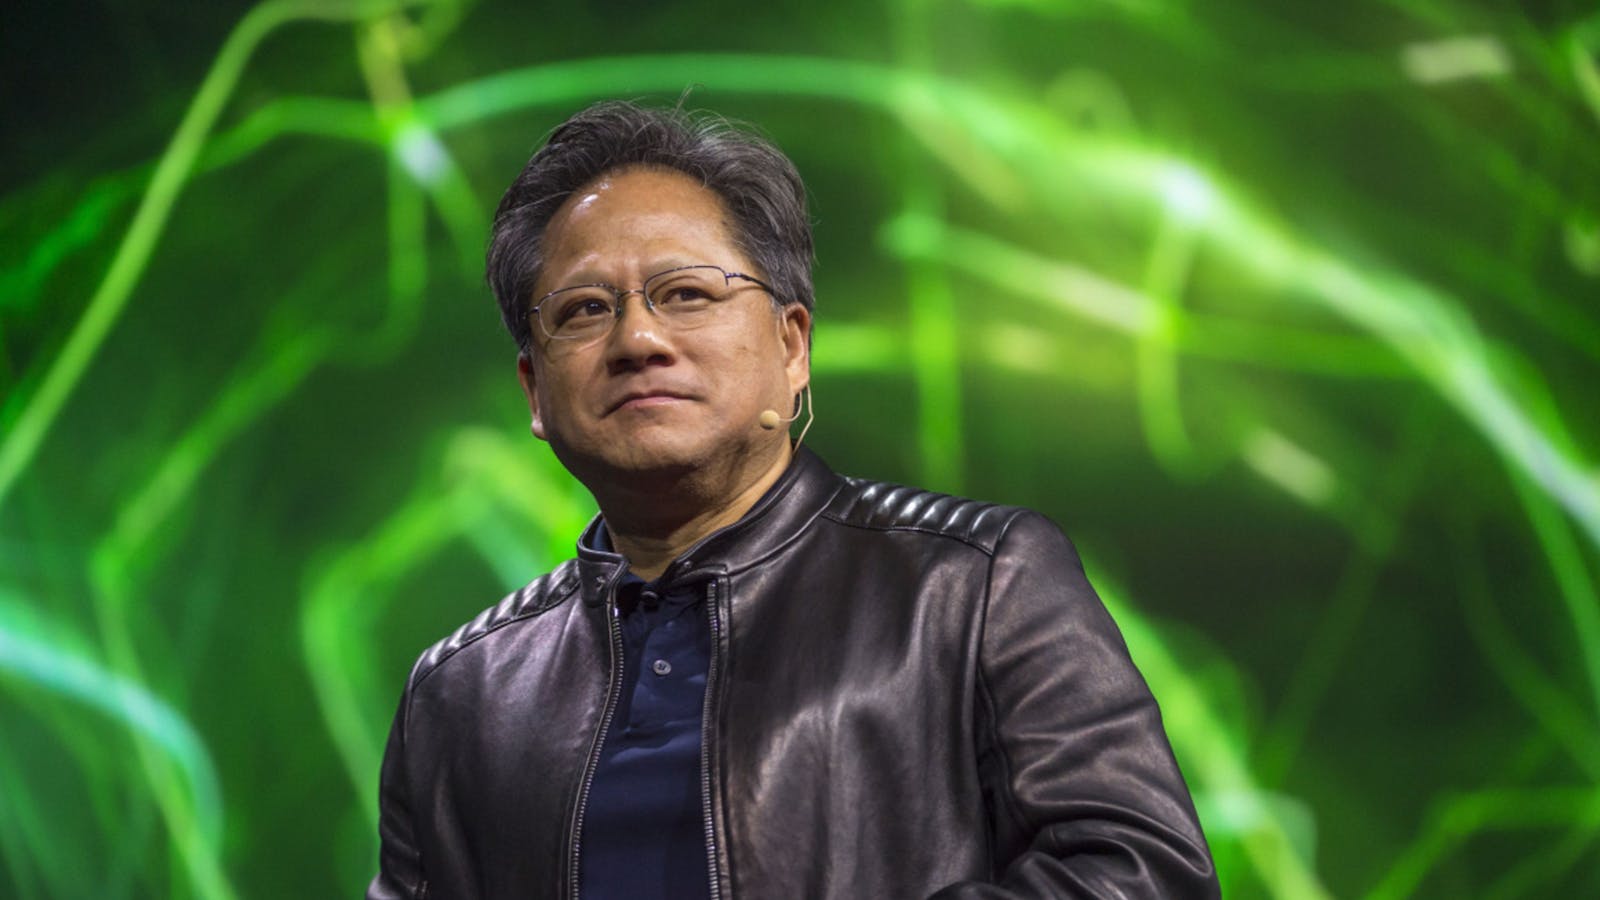 Nvidia CEO Jensen Huang. Photo by Bloomberg